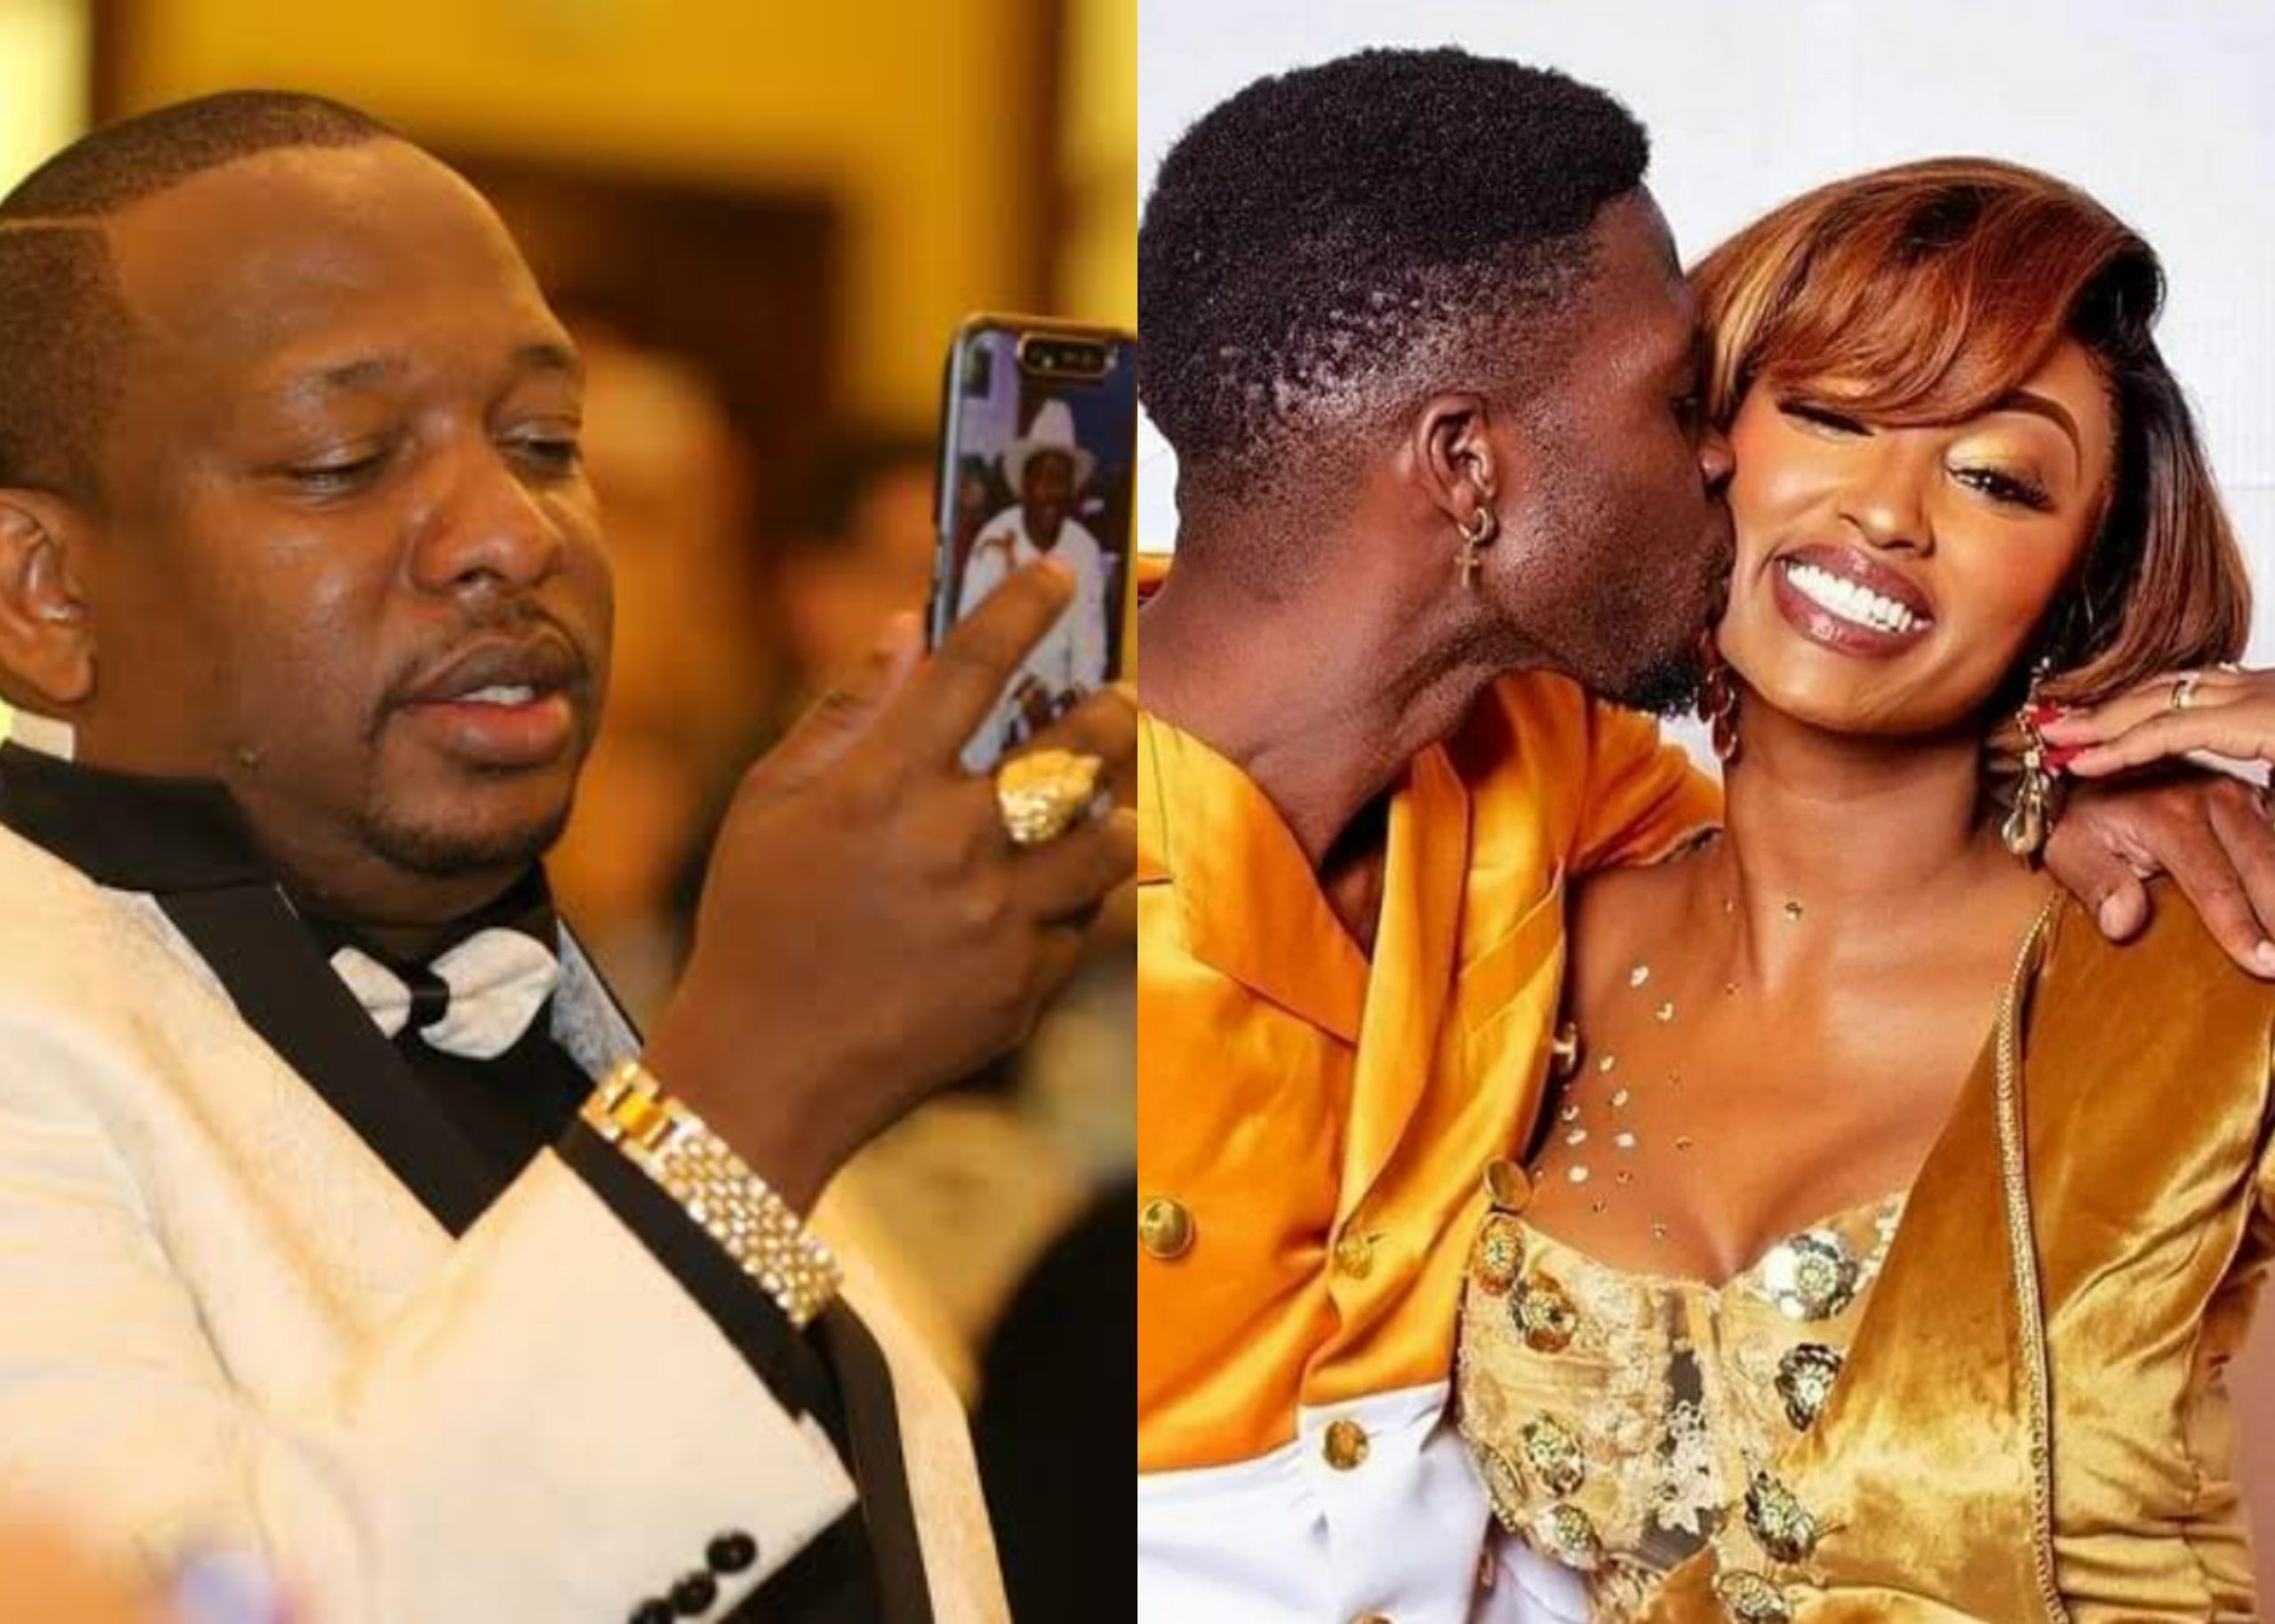 Michelle Ntalami should have ignored Mike Sonko - we all know he loves attention